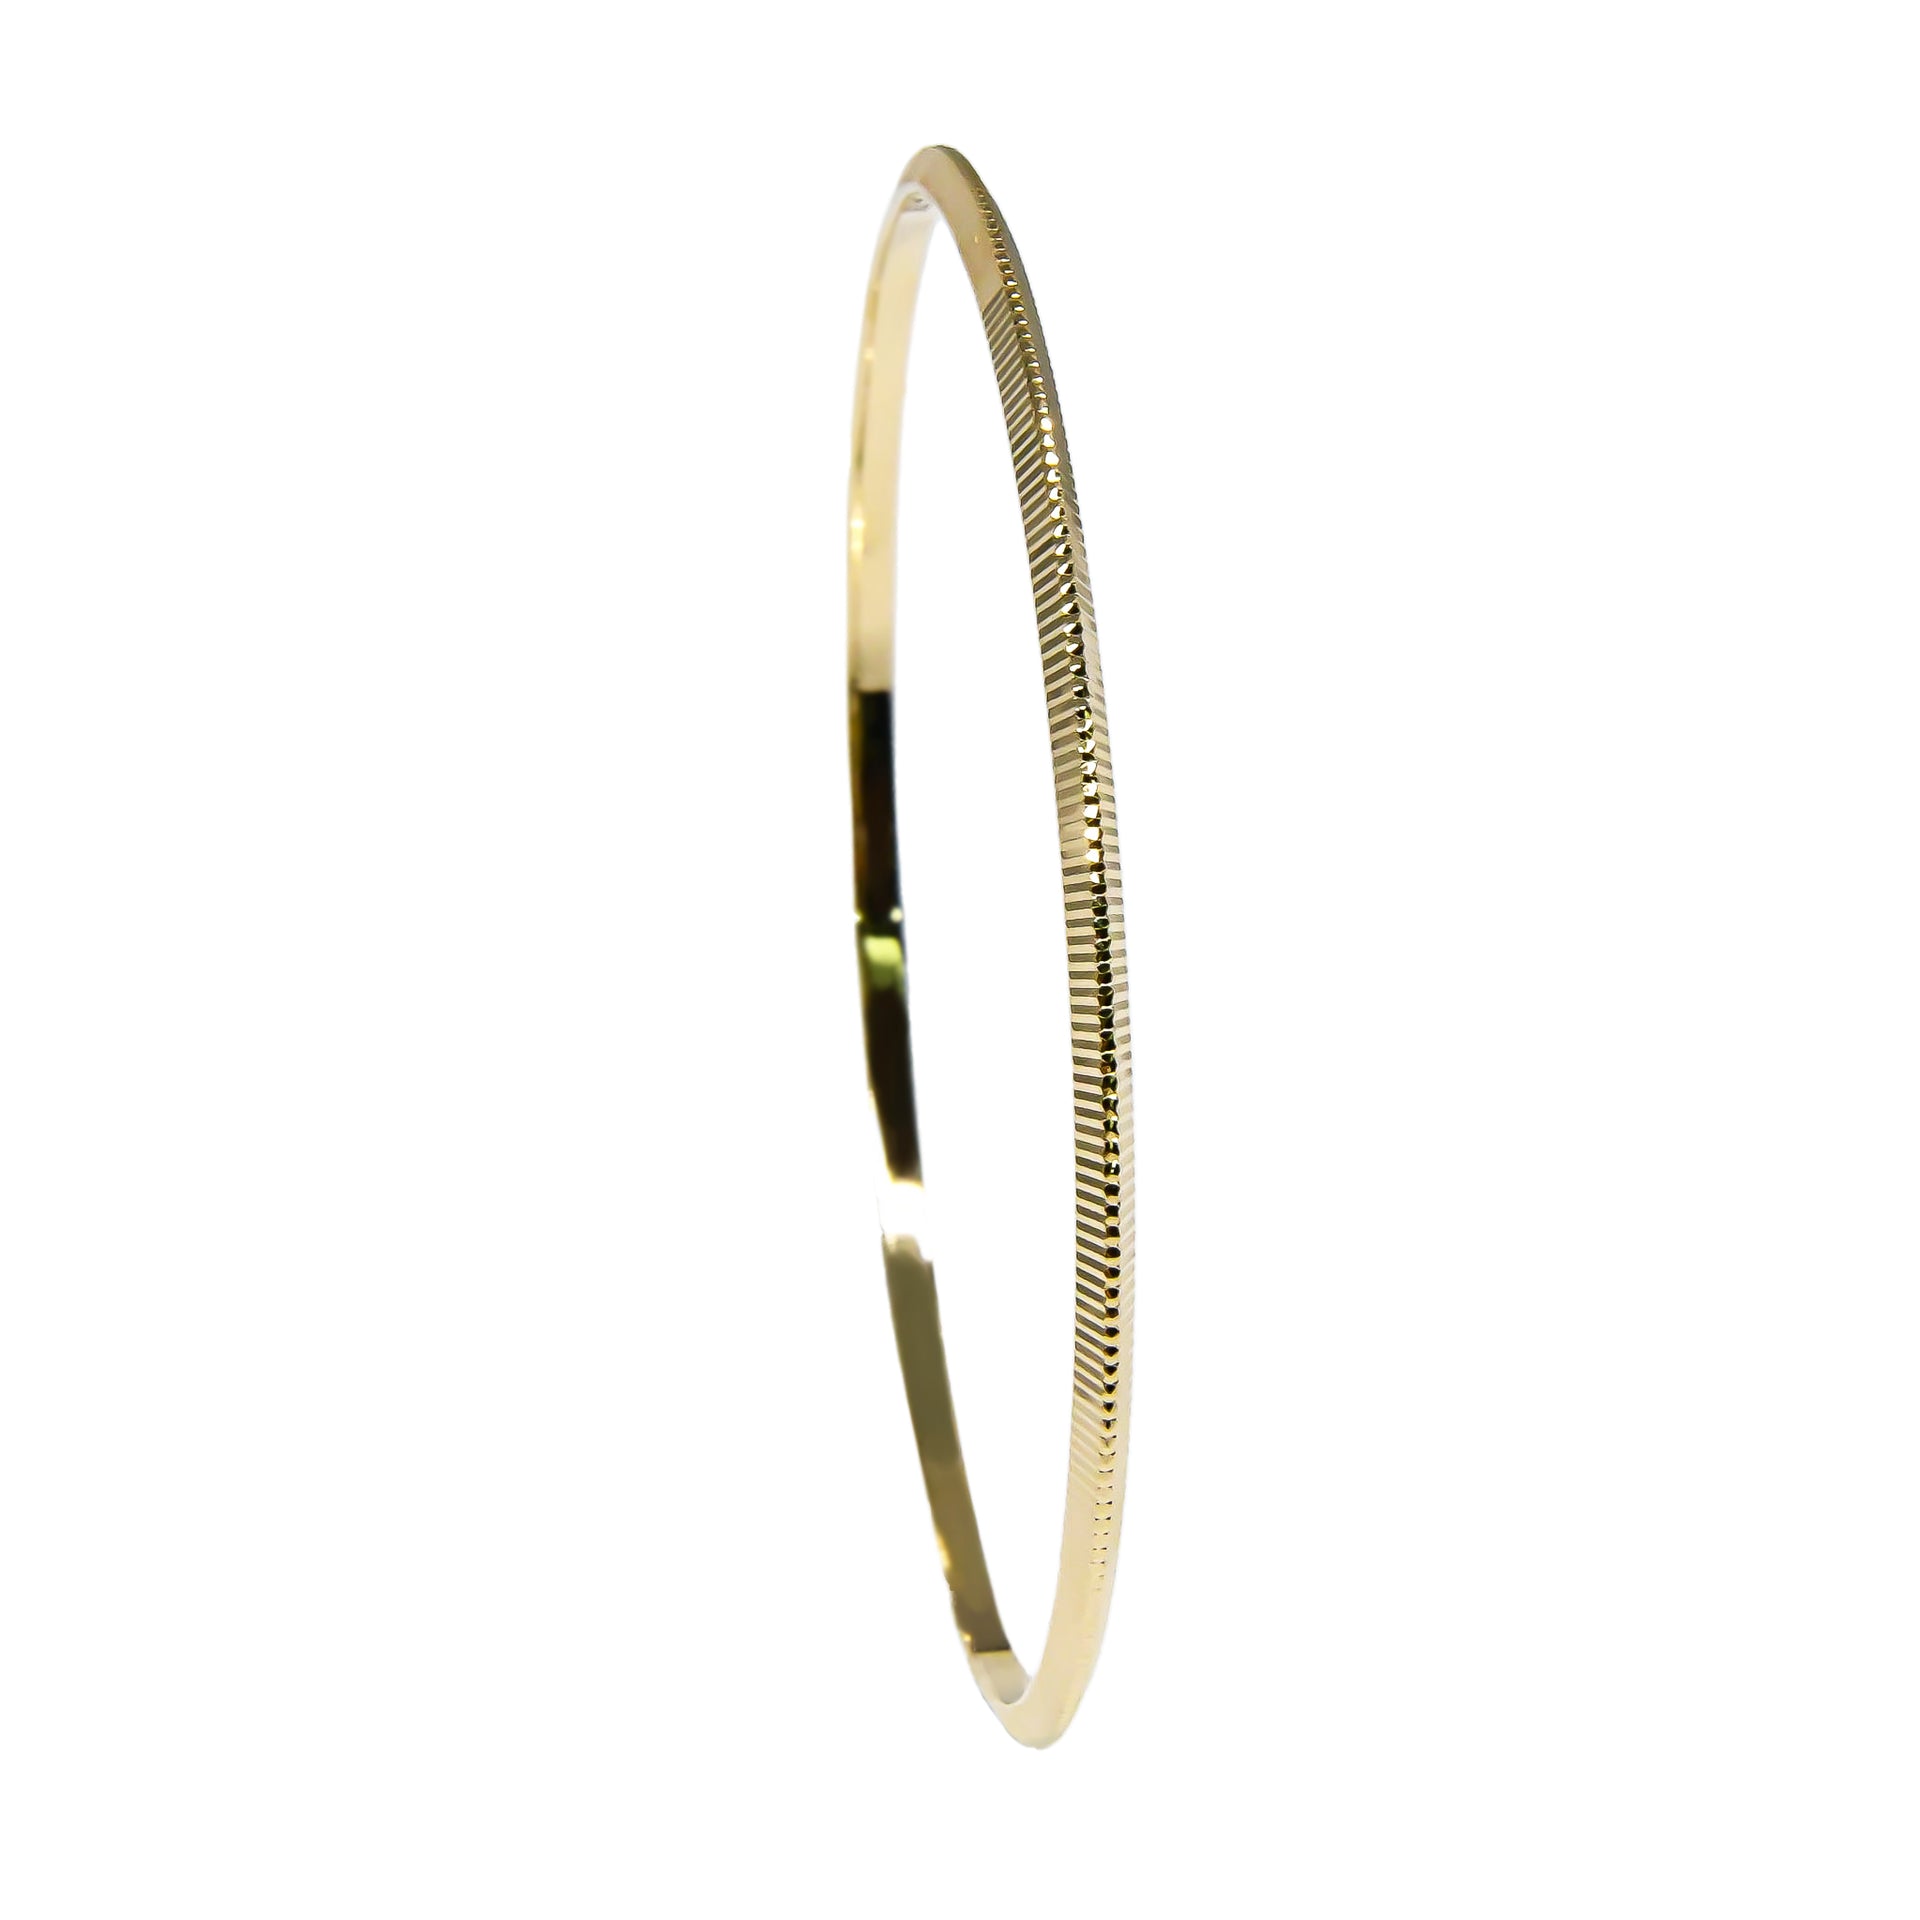 Bracelet EARTH IS ROUND 2mm profil triangle or jaune 18k 750